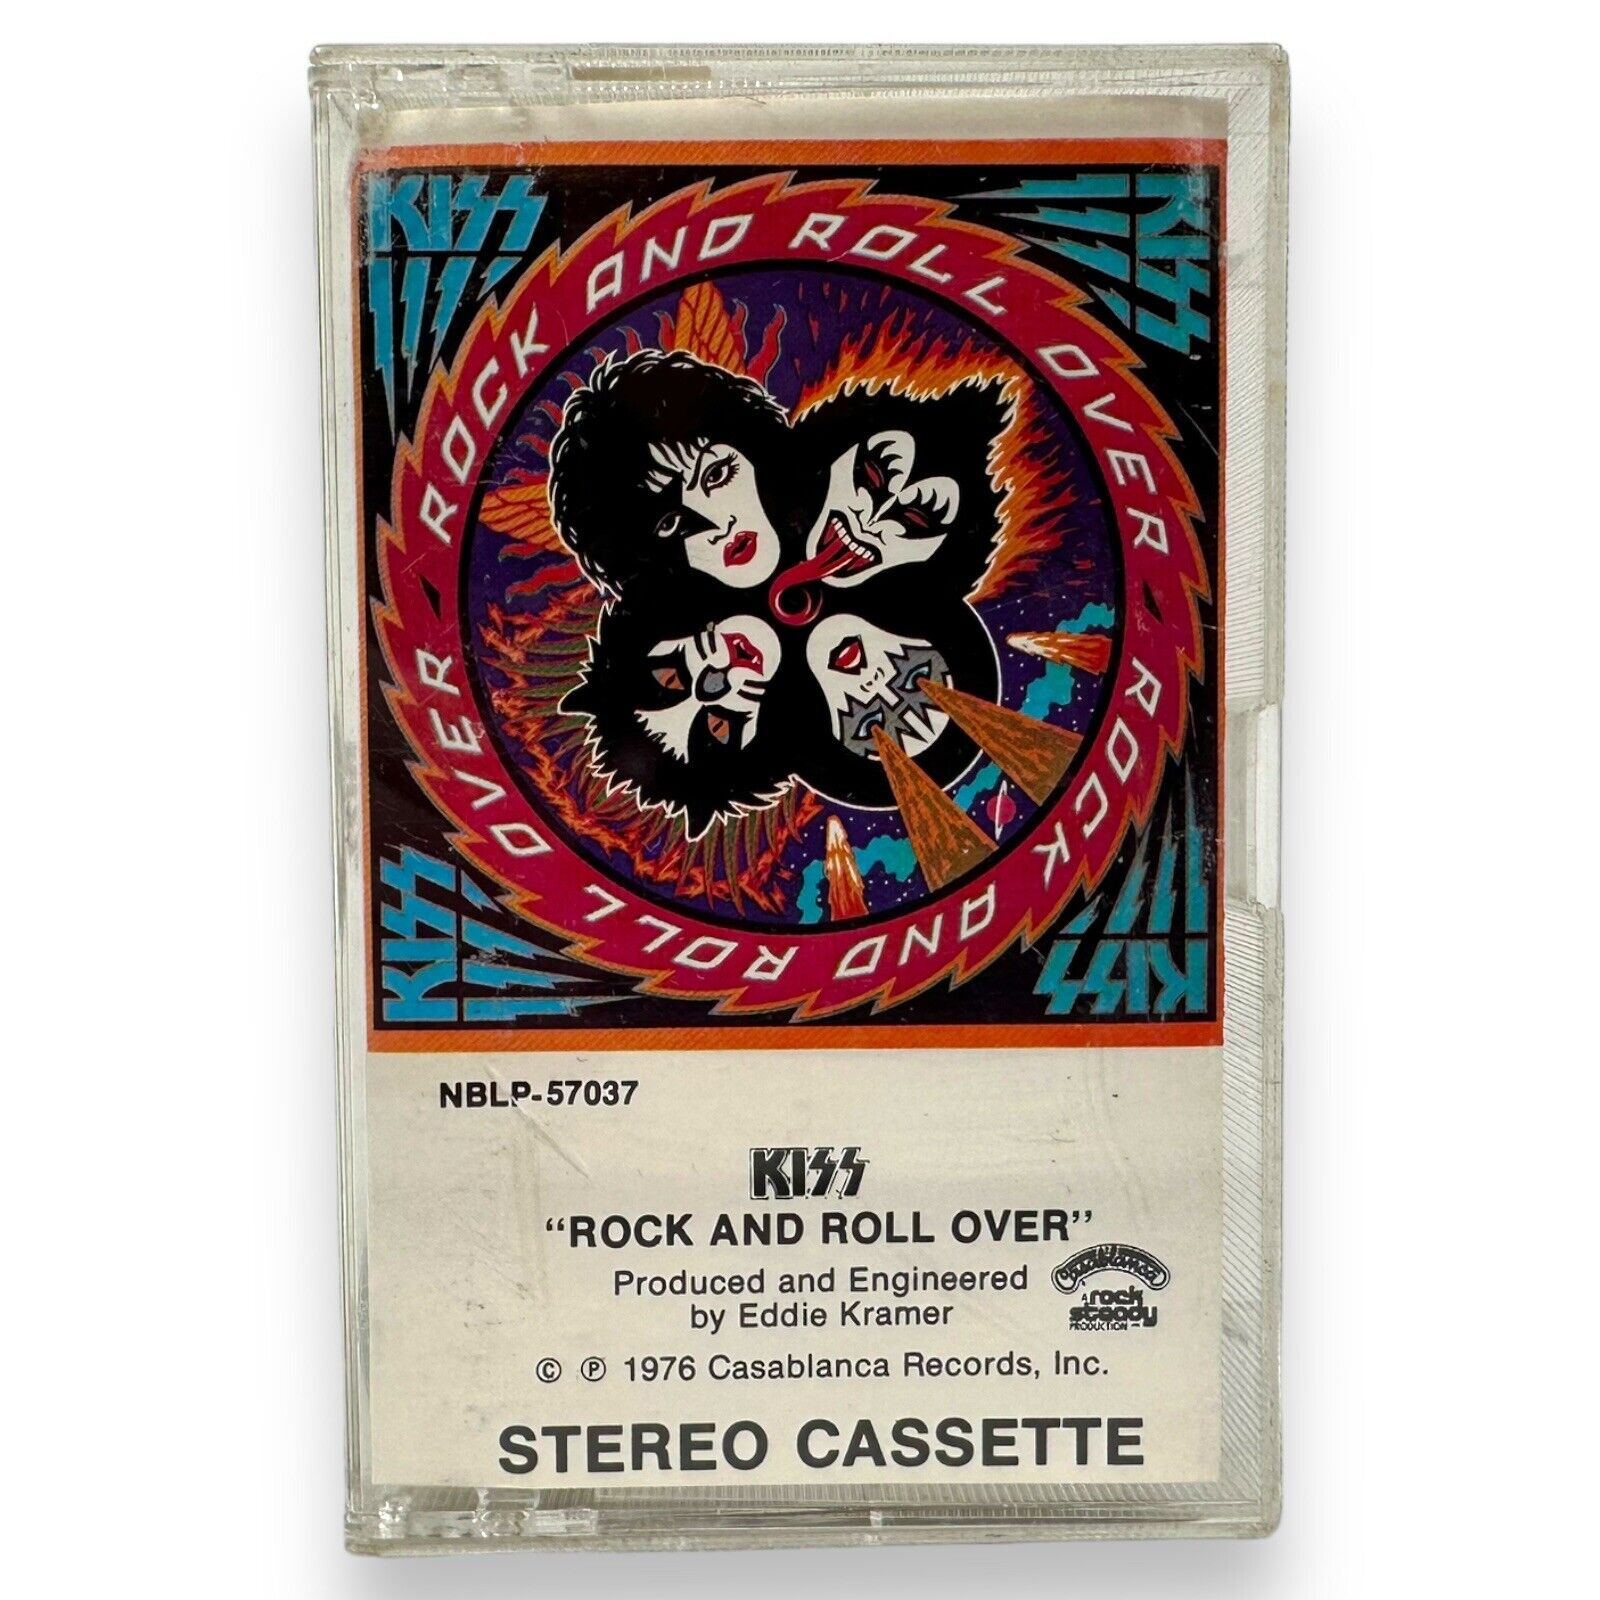 KISS Rock And Roll Over Cassette Tape Casablanca Records 1976